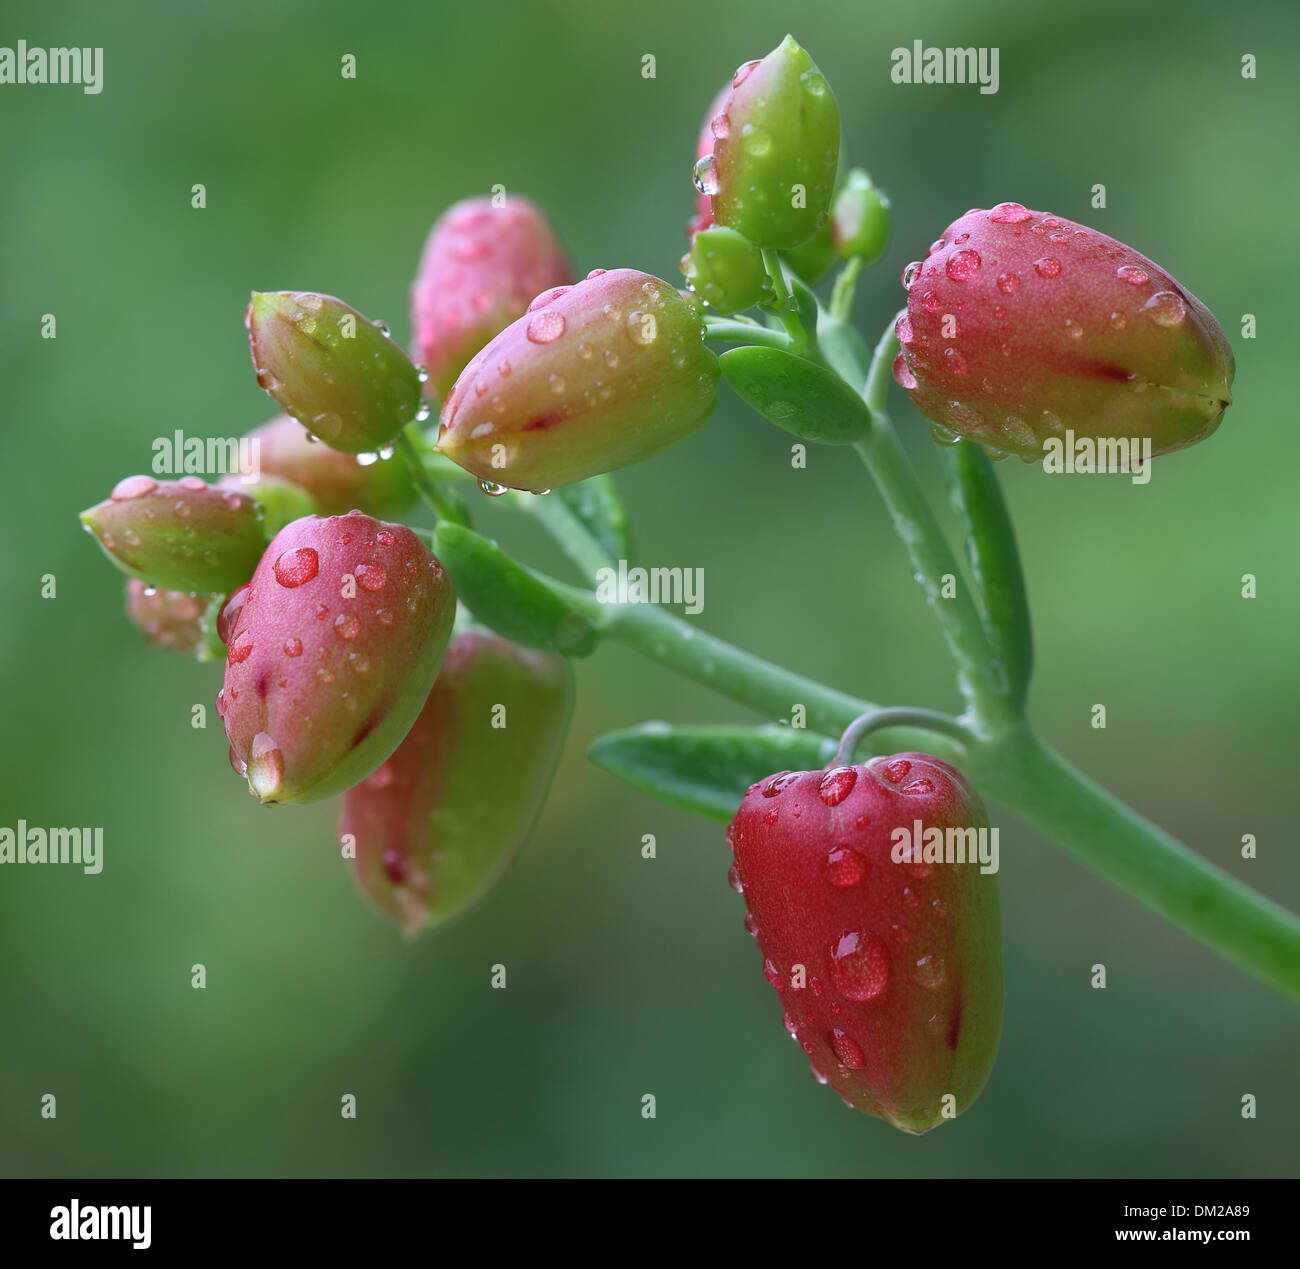 Herbal Kalanchoe flowers with water droops close up Stock Photo